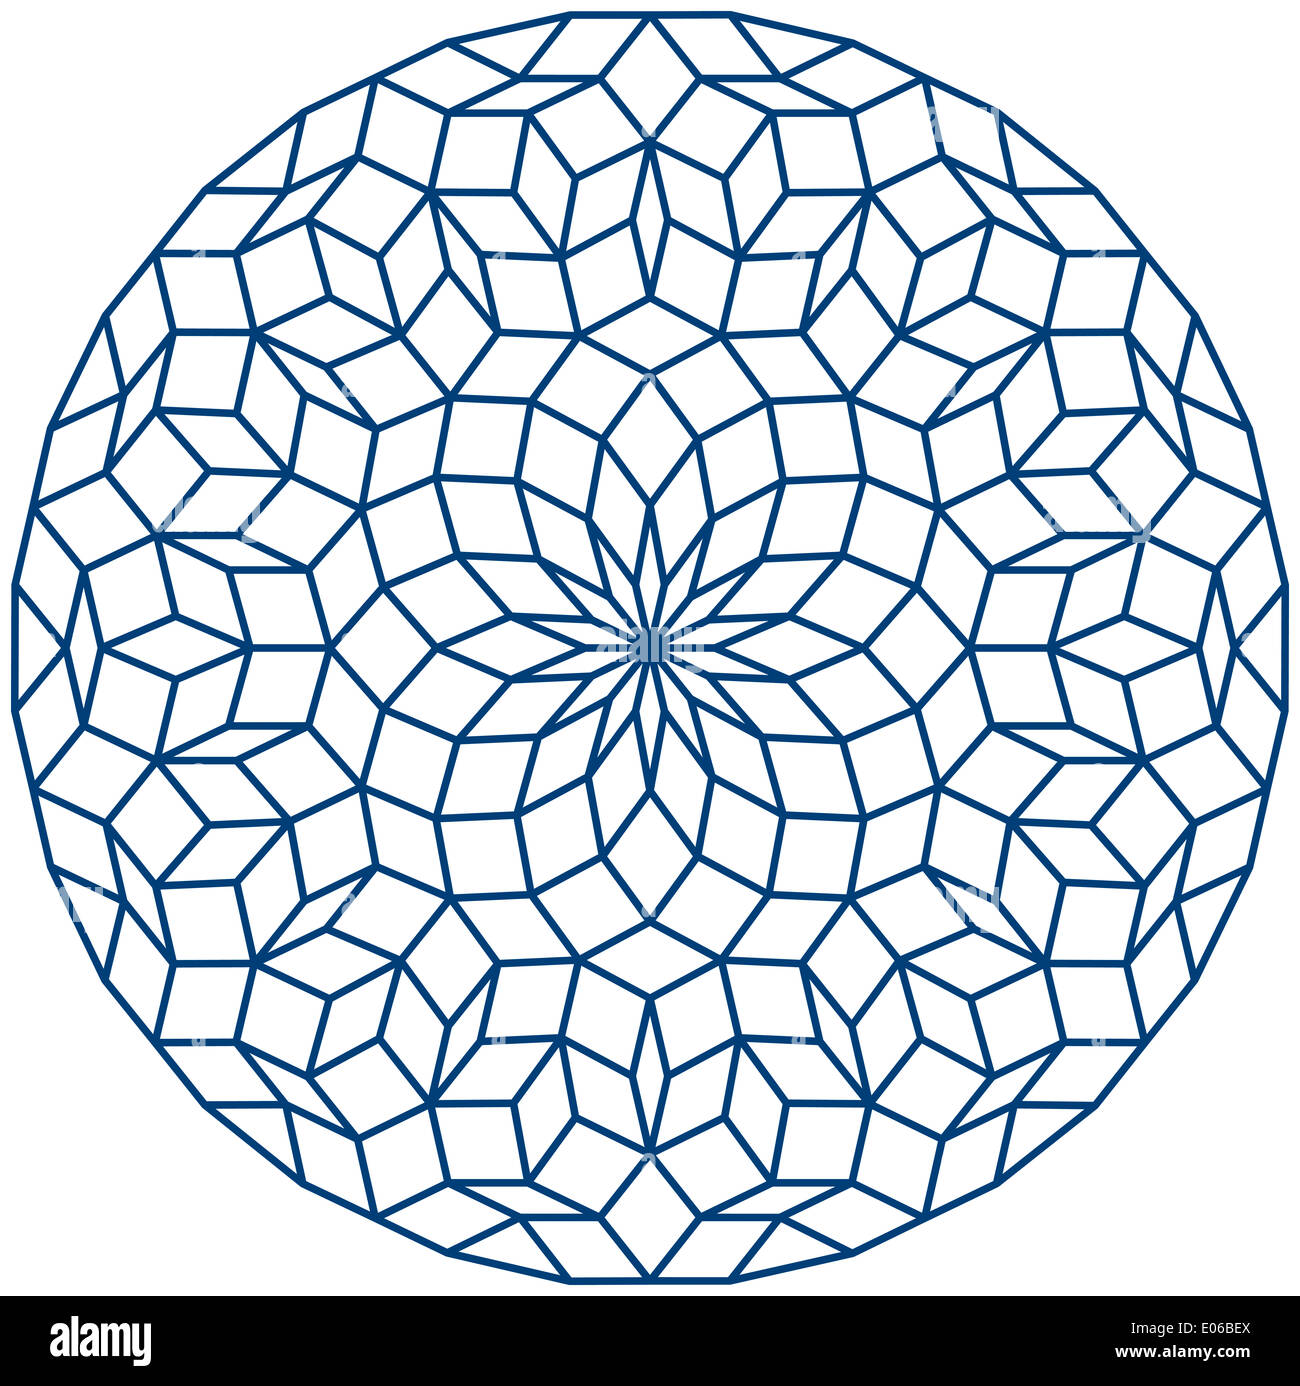 Penrose Tiling - Penrose Pattern, a non-periodic tiling generated by an aperiodic set of prototiles. Stock Photo